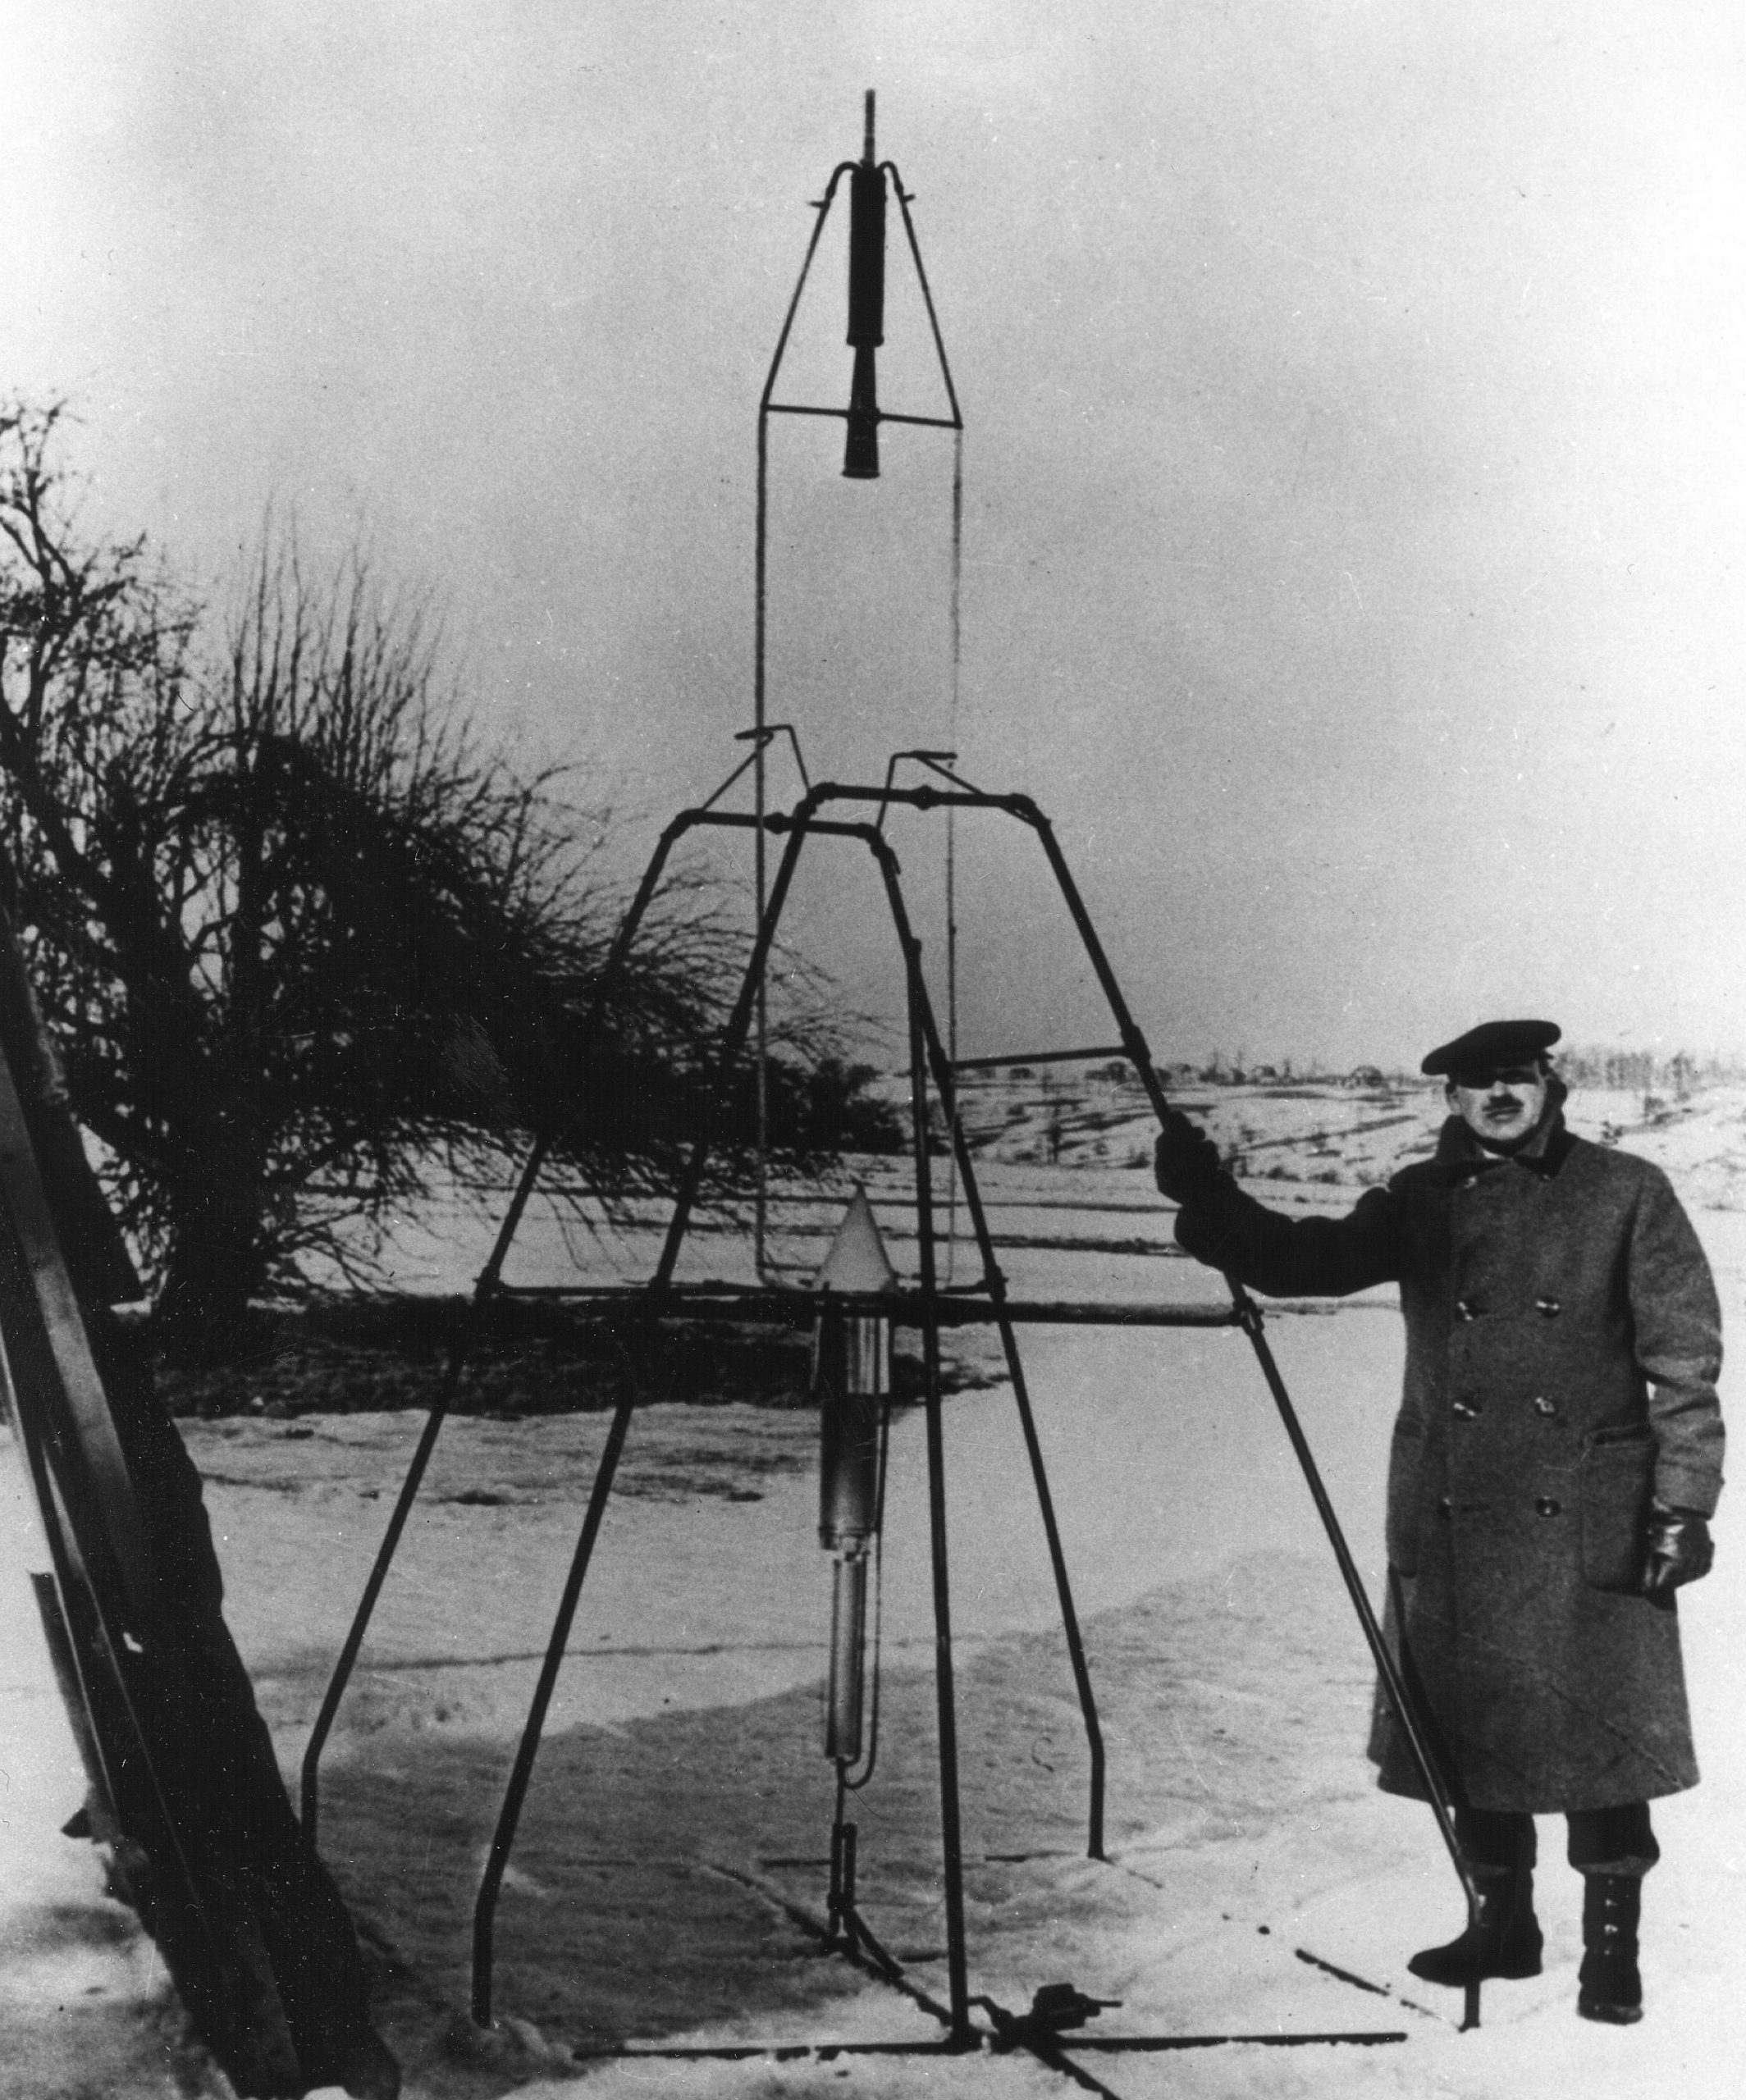 A black and white photograph of a man standing next to a launching frame with a small rocket in the center.